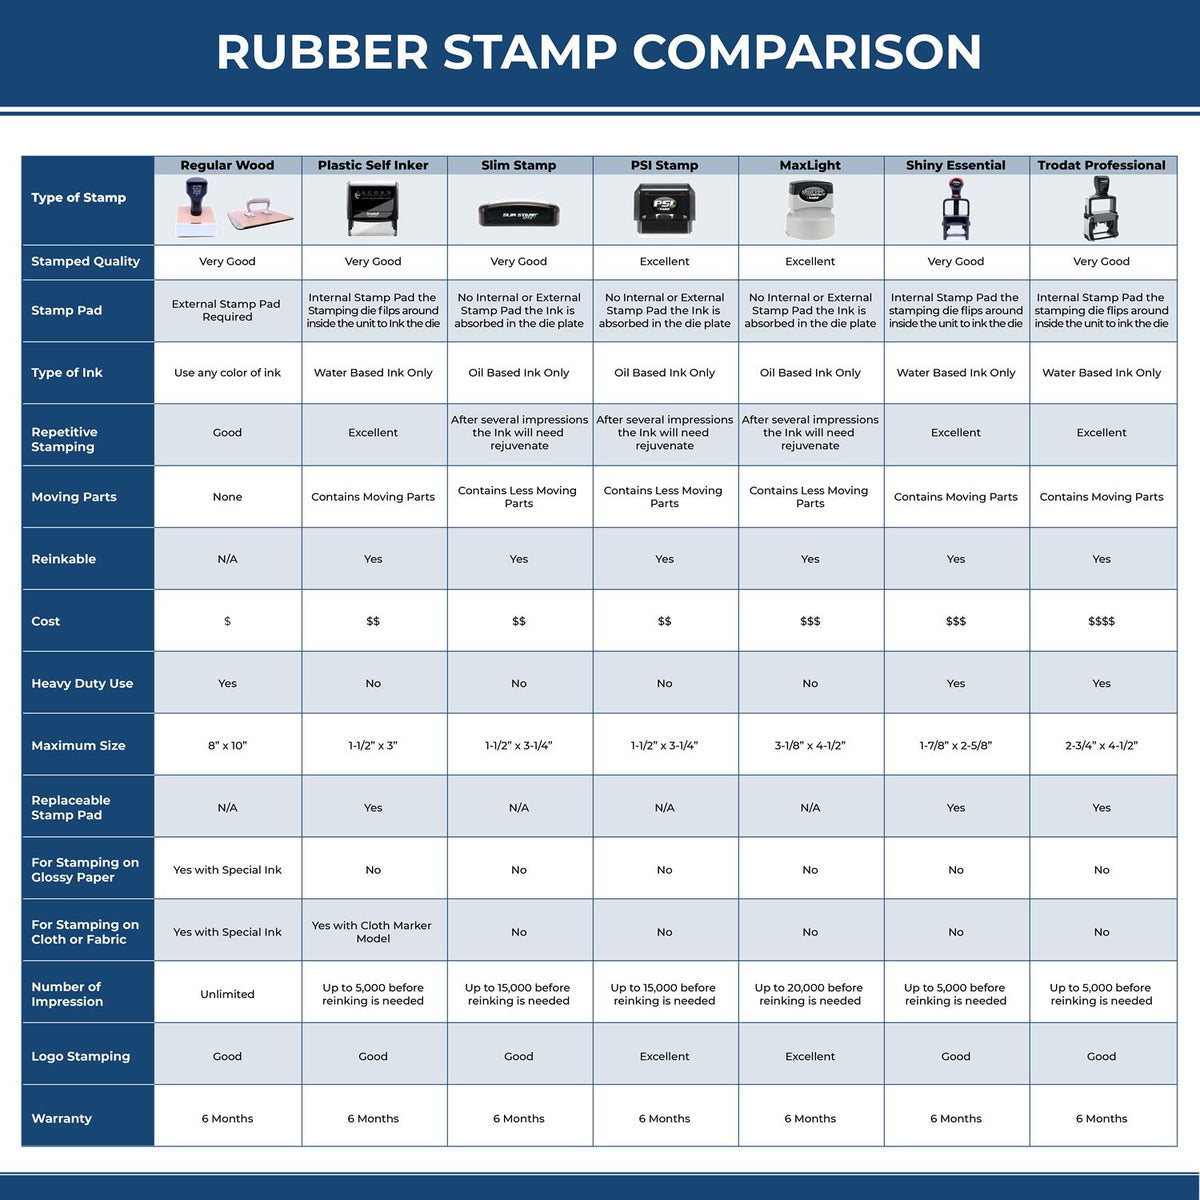 A comparison chart for the different types of mount models available for the Heavy-Duty Maine Rectangular Notary Stamp.